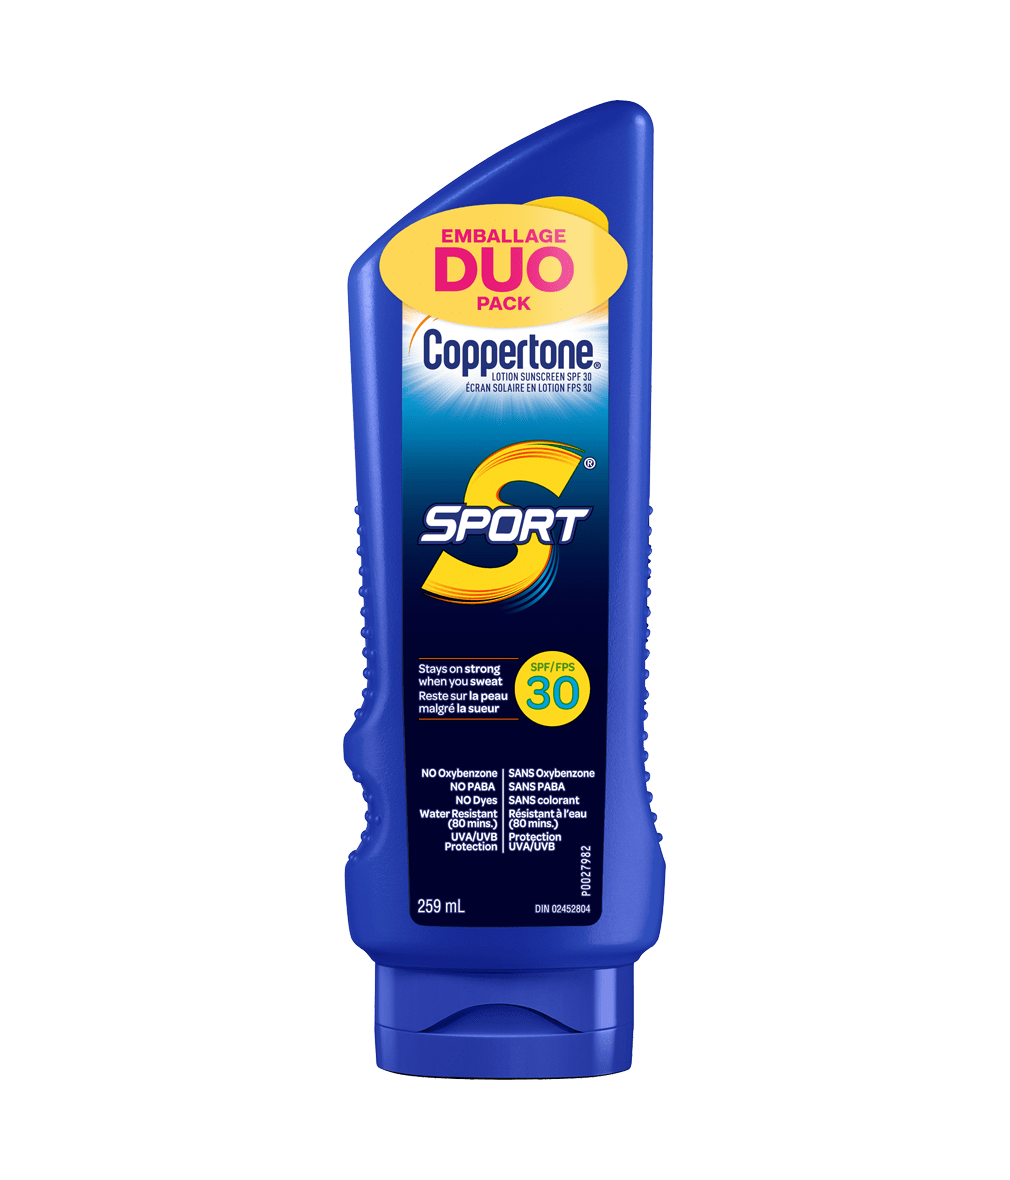 Coppertone SPORT® Sunscreen Lotion SPF30 Duo Pack